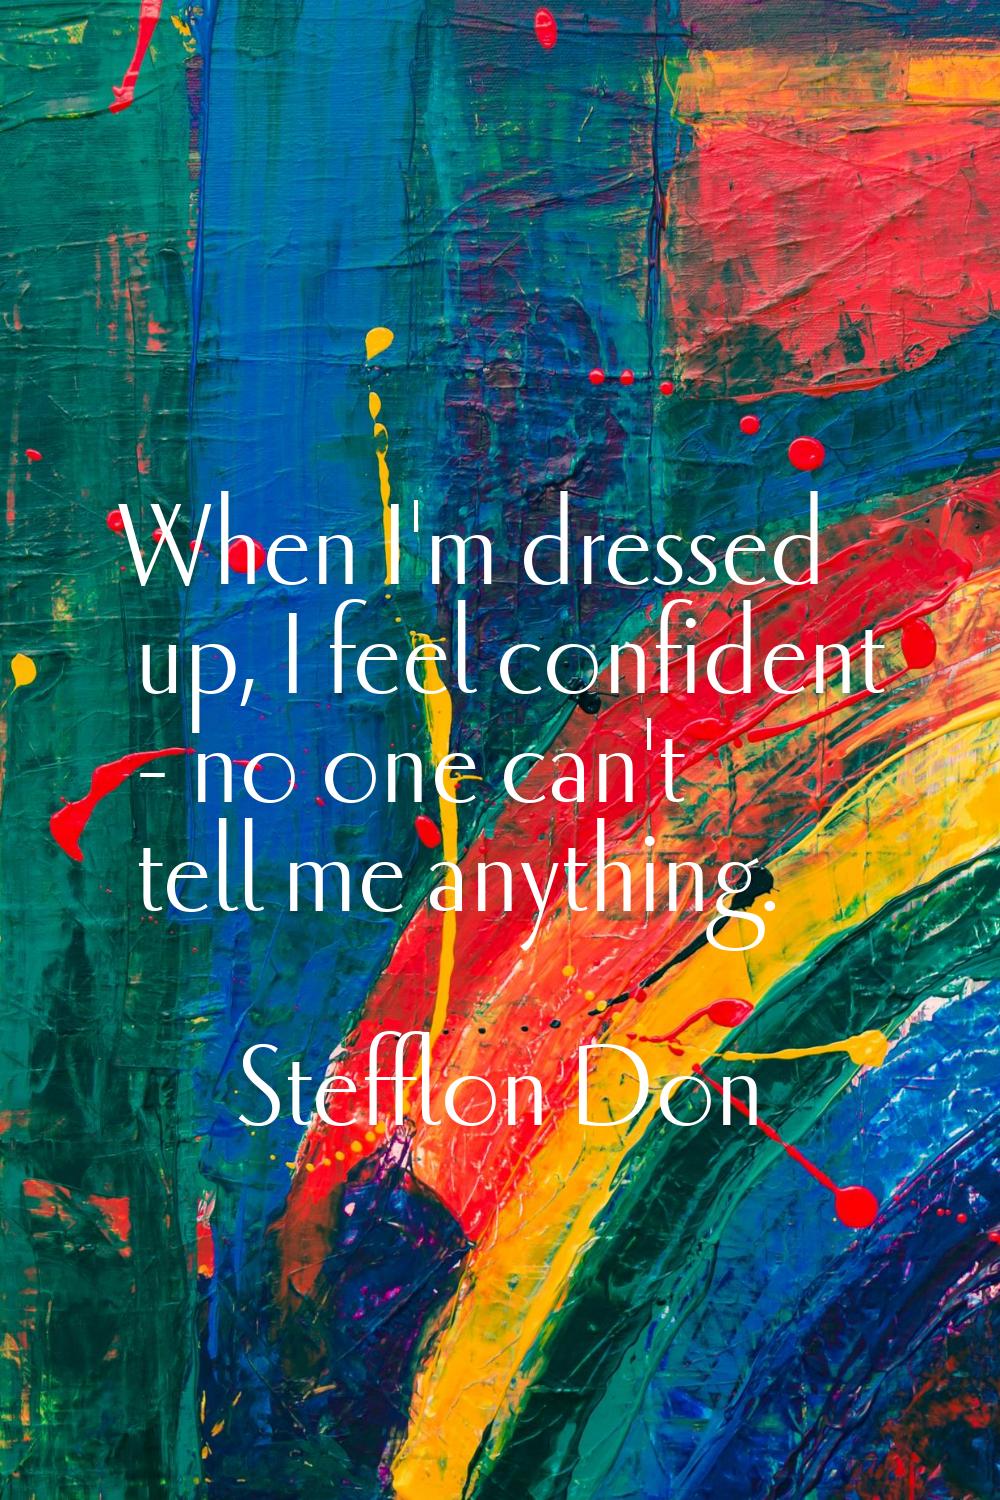 When I'm dressed up, I feel confident - no one can't tell me anything.